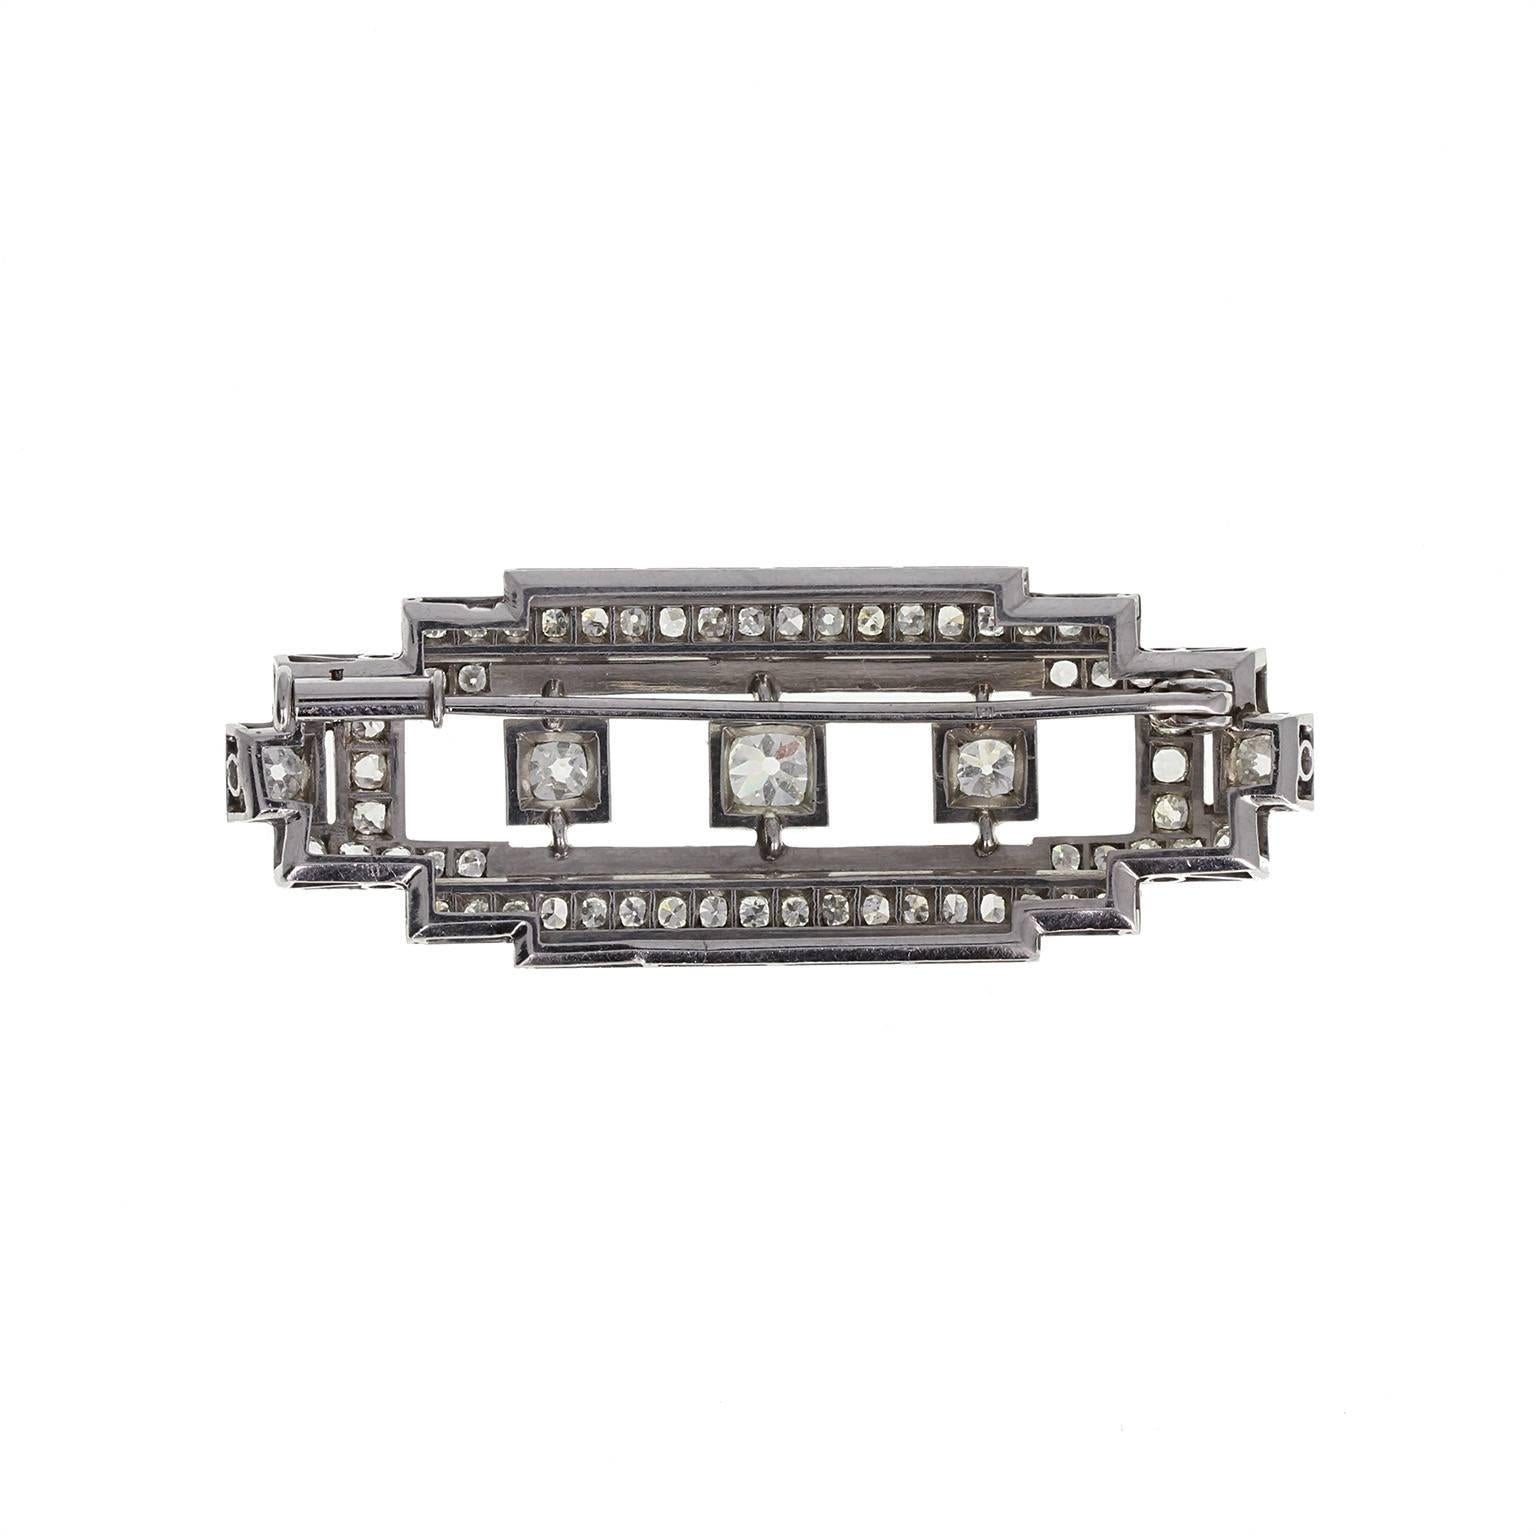 A rampant Art Deco brooch fashioned from platinum in the typical period geometric style. Set with old-cut diamonds. The epitome of 1920s jewellery style.
 
Setting
Tests as platinum
 
Diamond
Weight: 3.00 carats in total, approximately
Clarity: